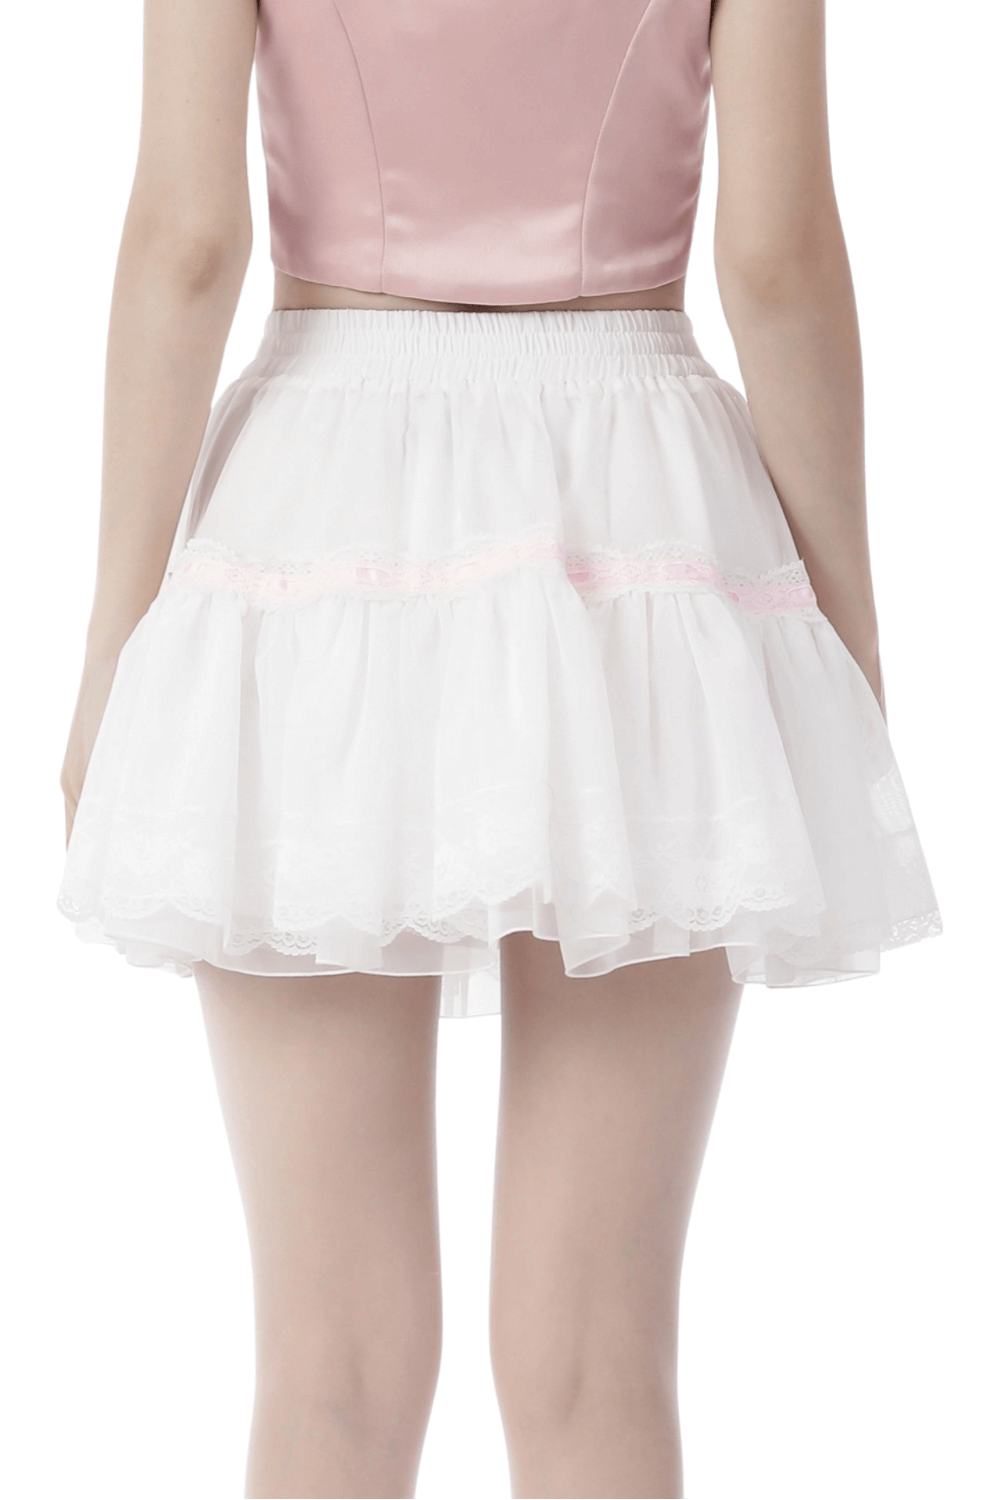 Sweet Lolita White Pleated Mini Skirt with Pink Bows